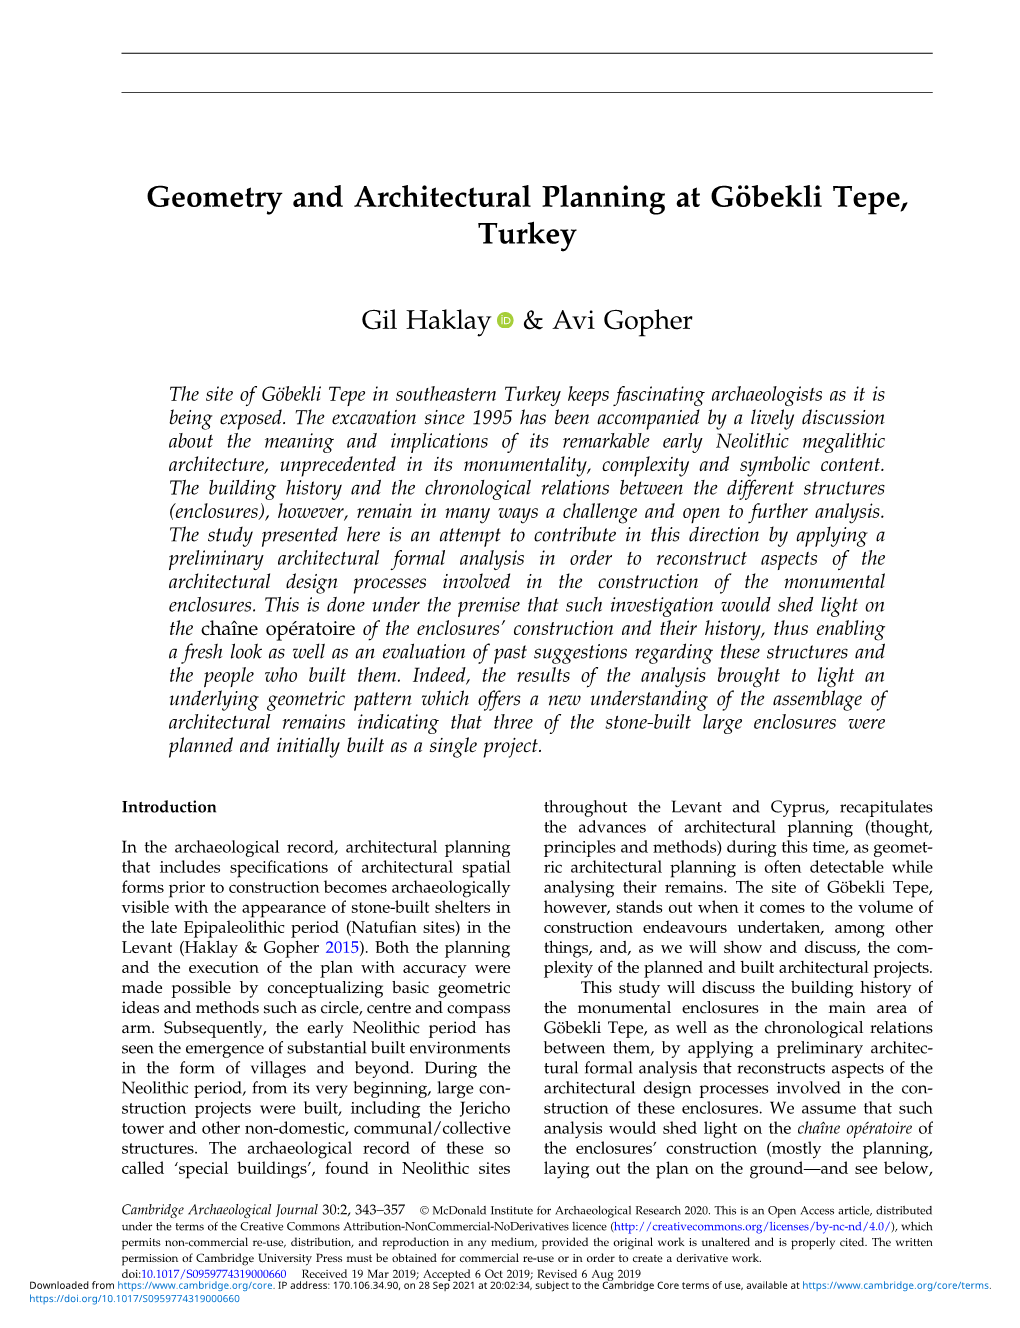 Geometry and Architectural Planning at Göbekli Tepe, Turkey